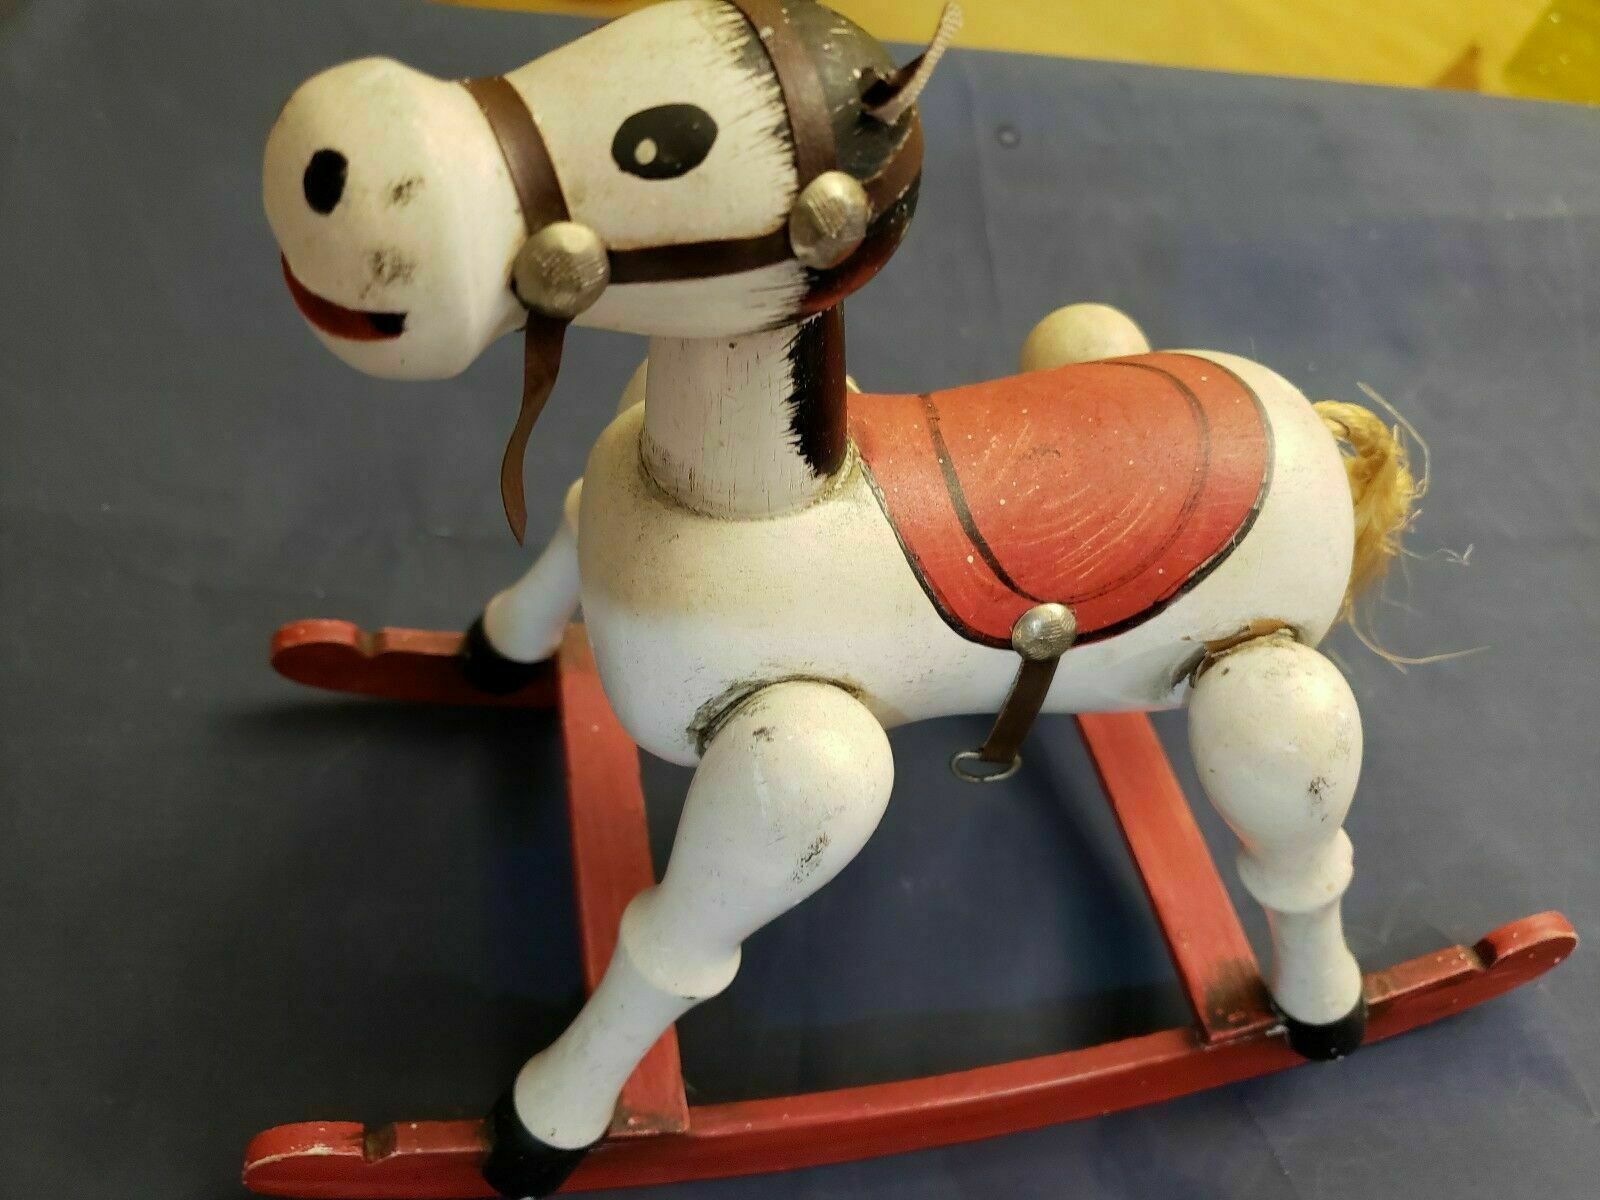 Vintage Enesco Wooden Musical Toy Rocking Horse